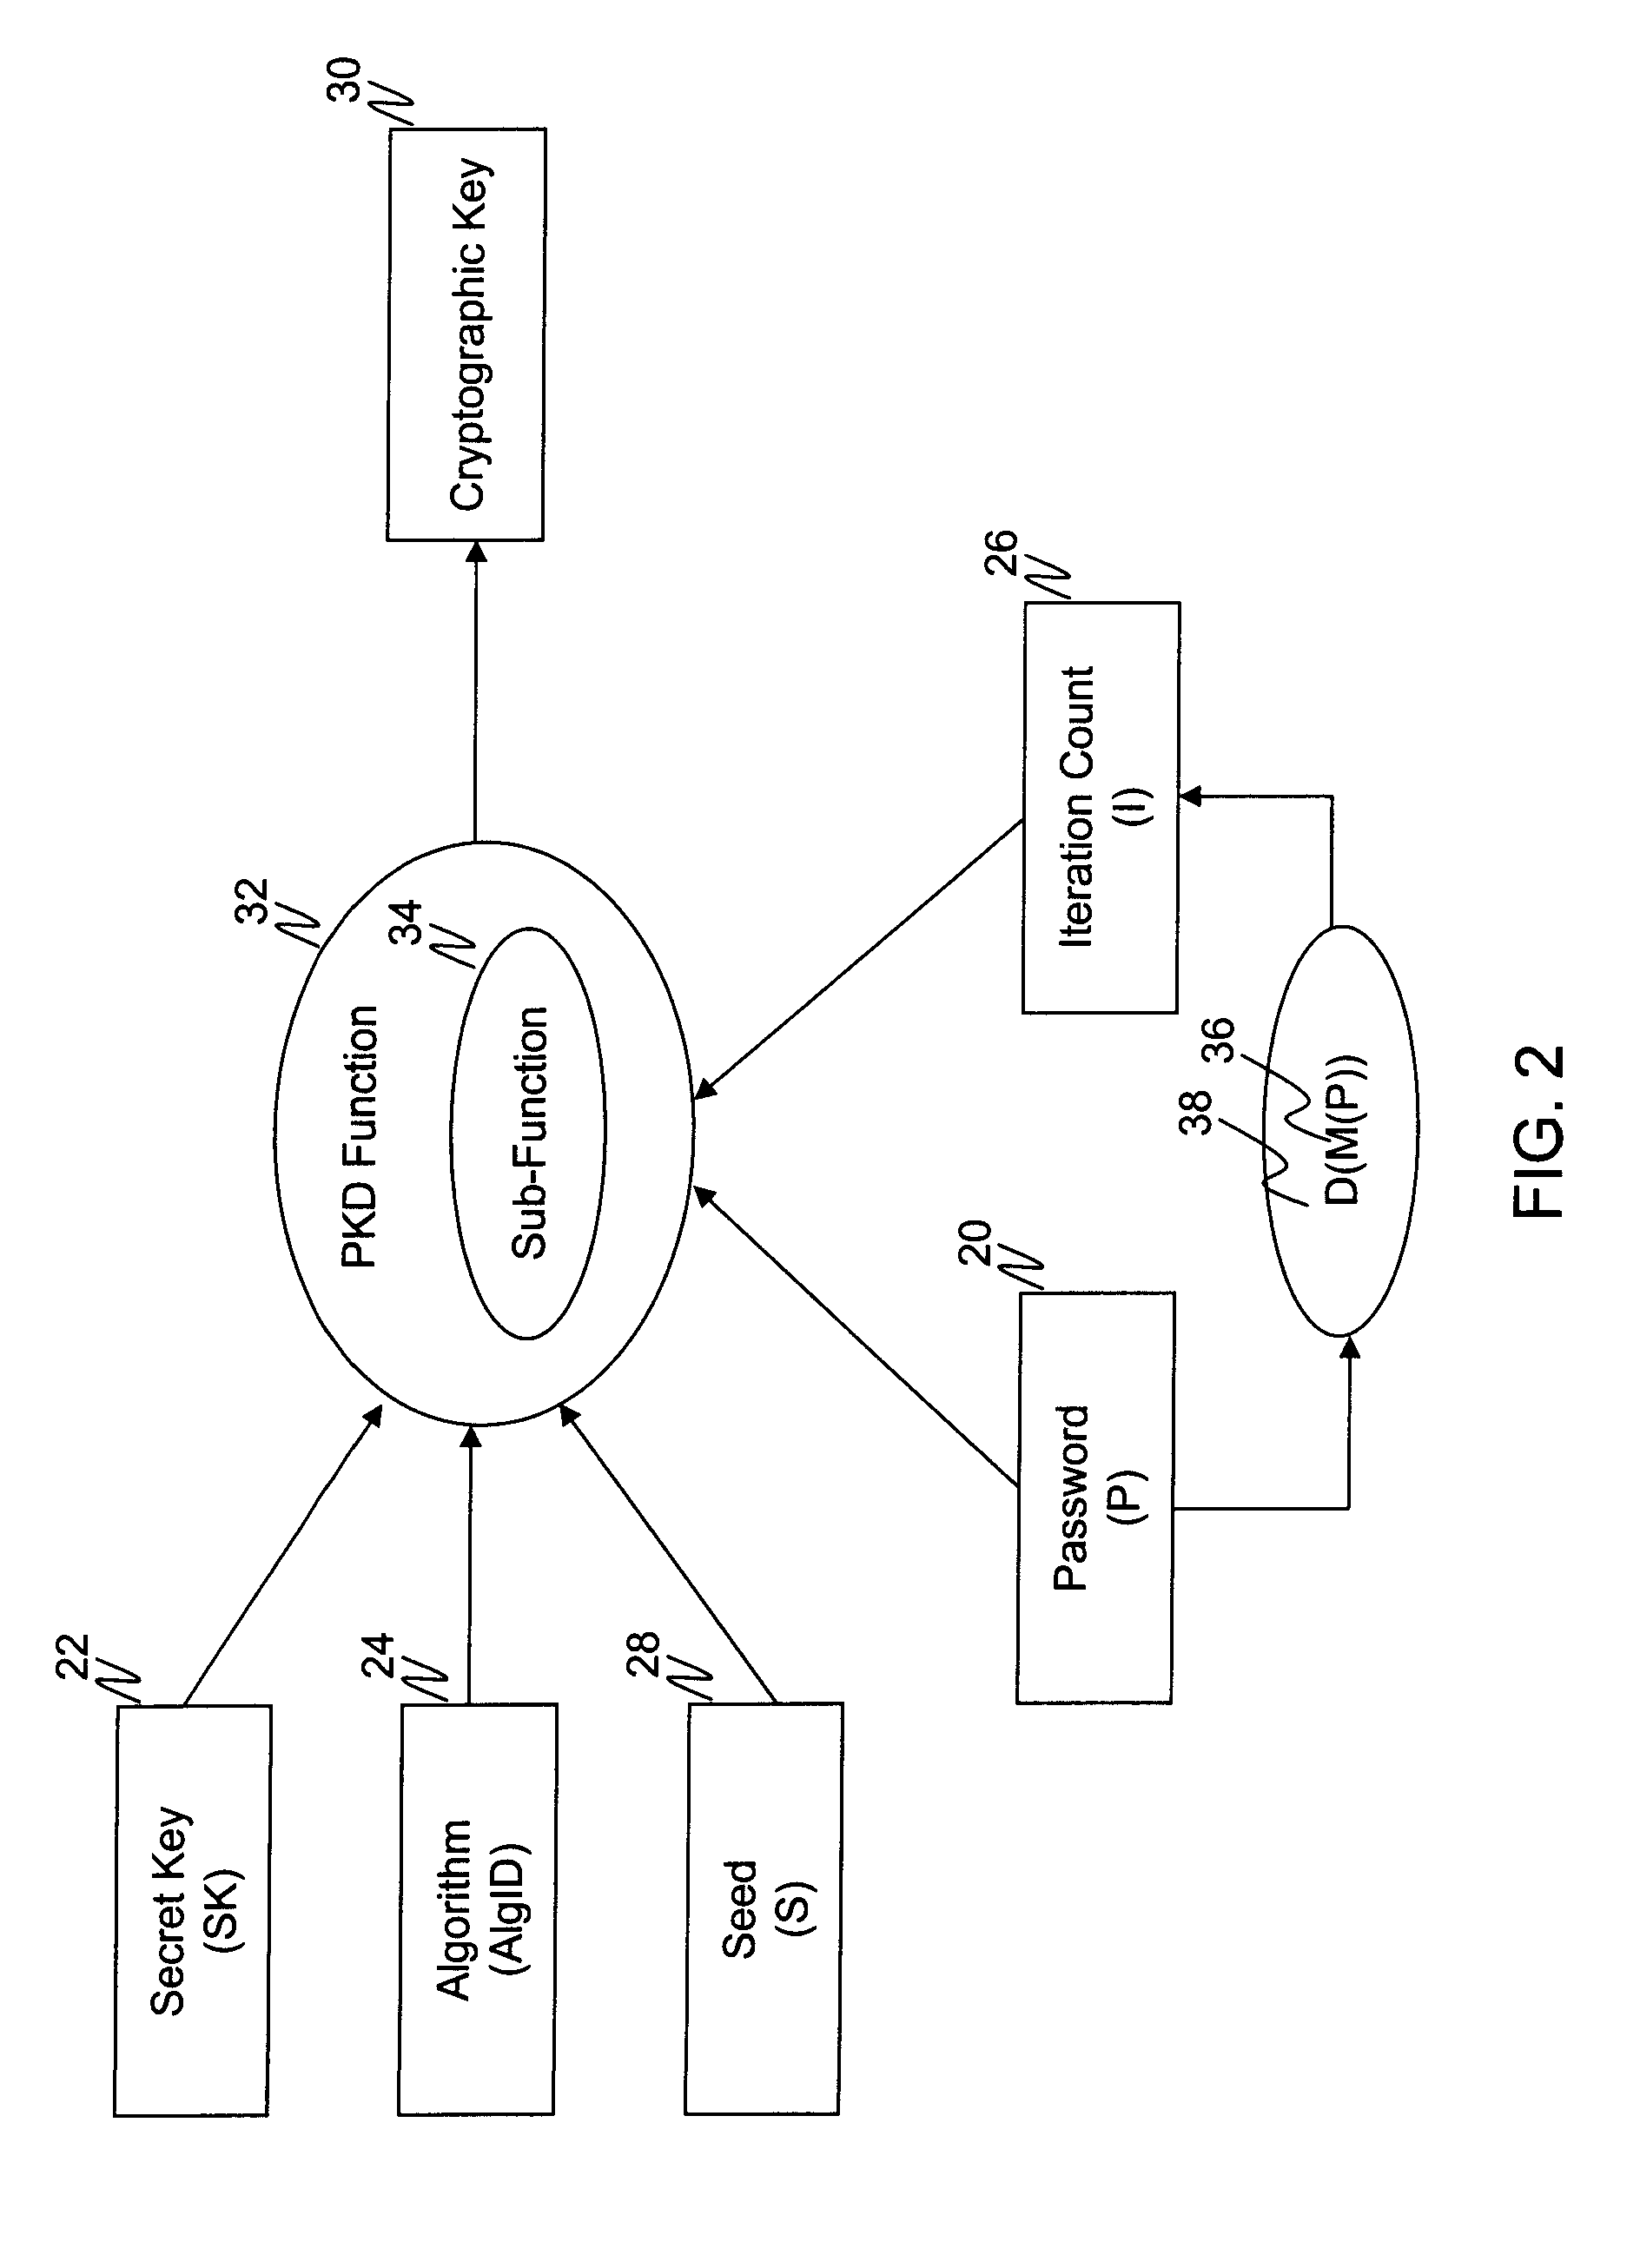 Password key derivation system and method